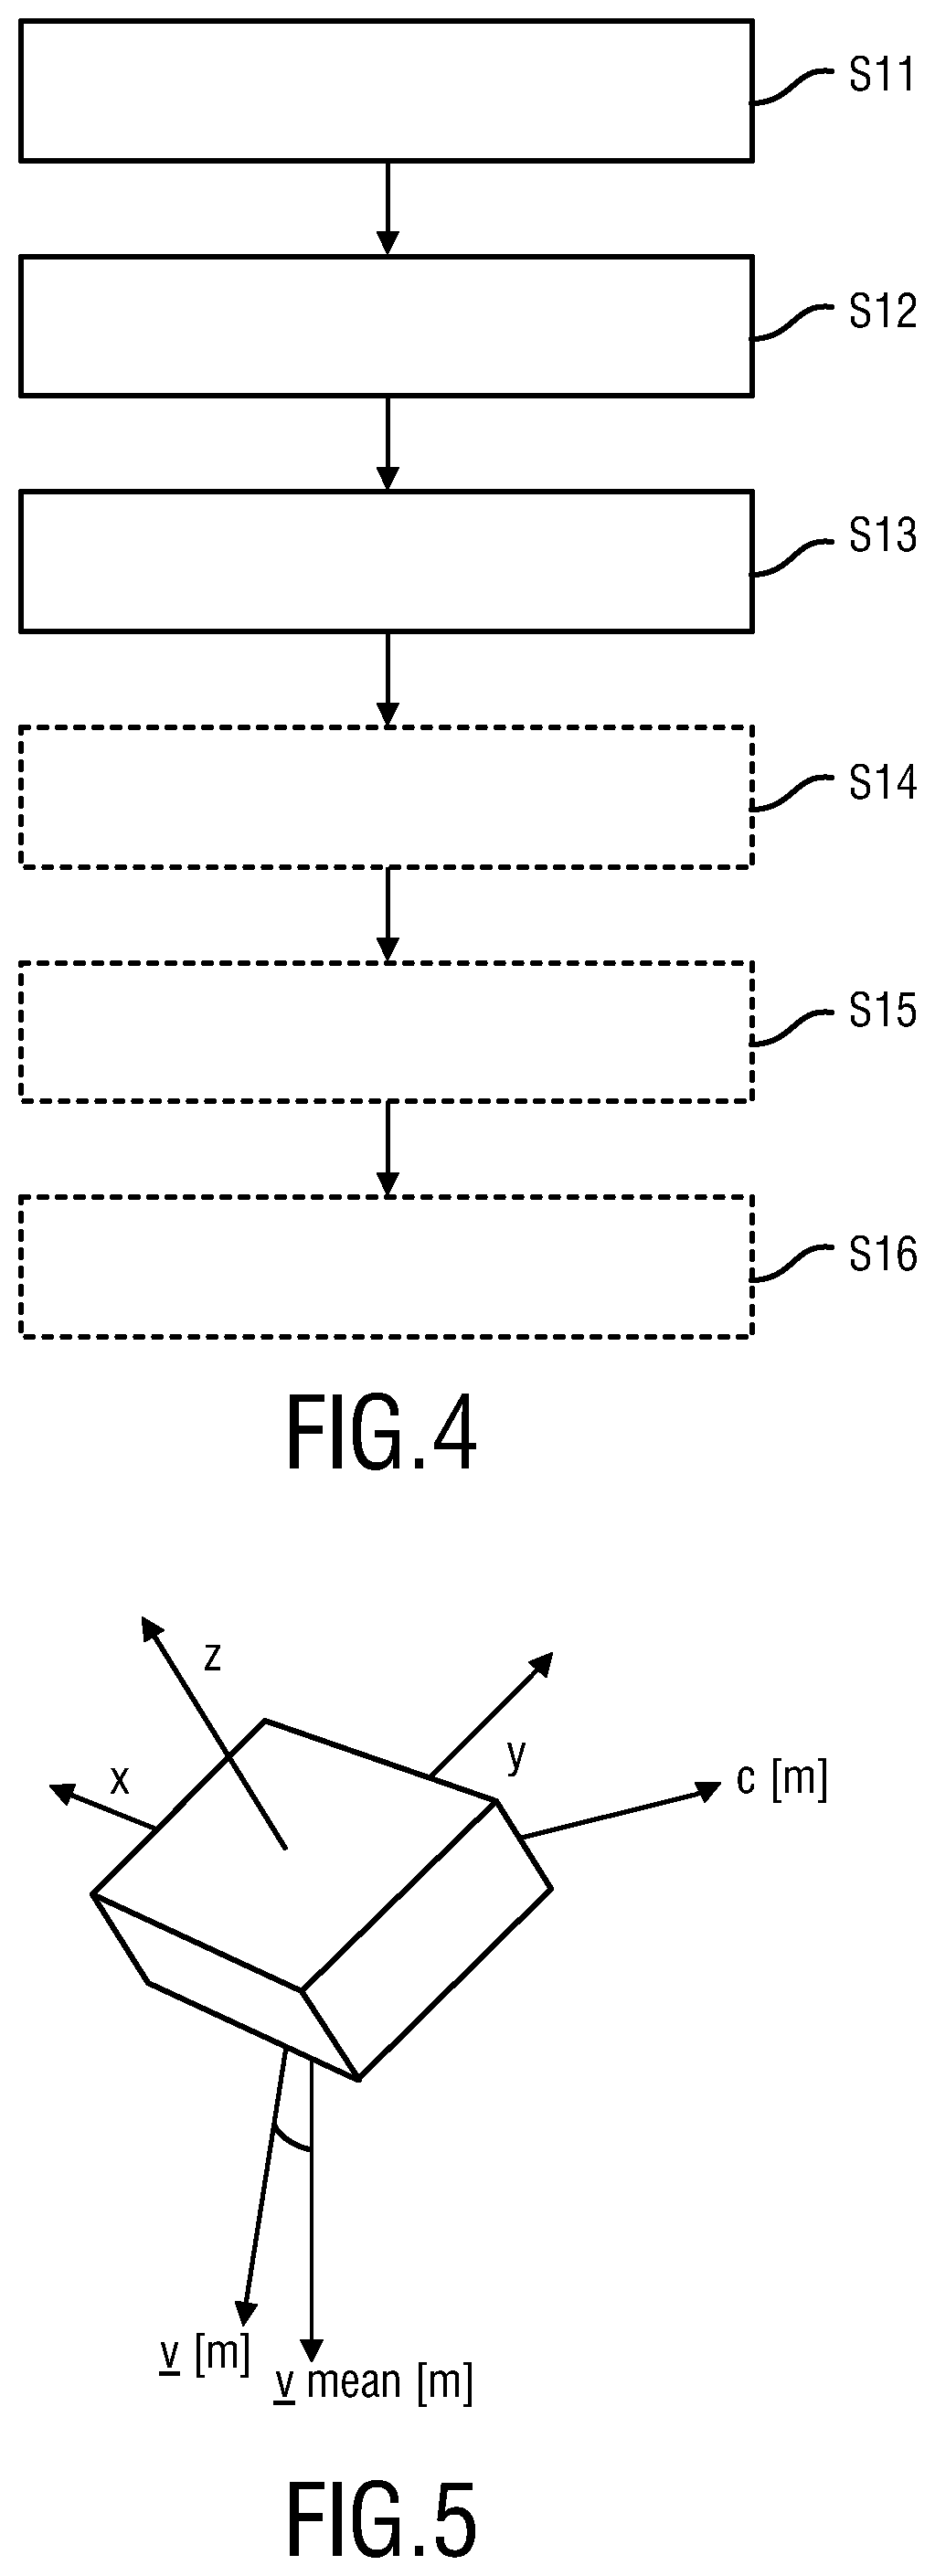 Processing apparatus and processing method for determining a respiratory signal of a subject